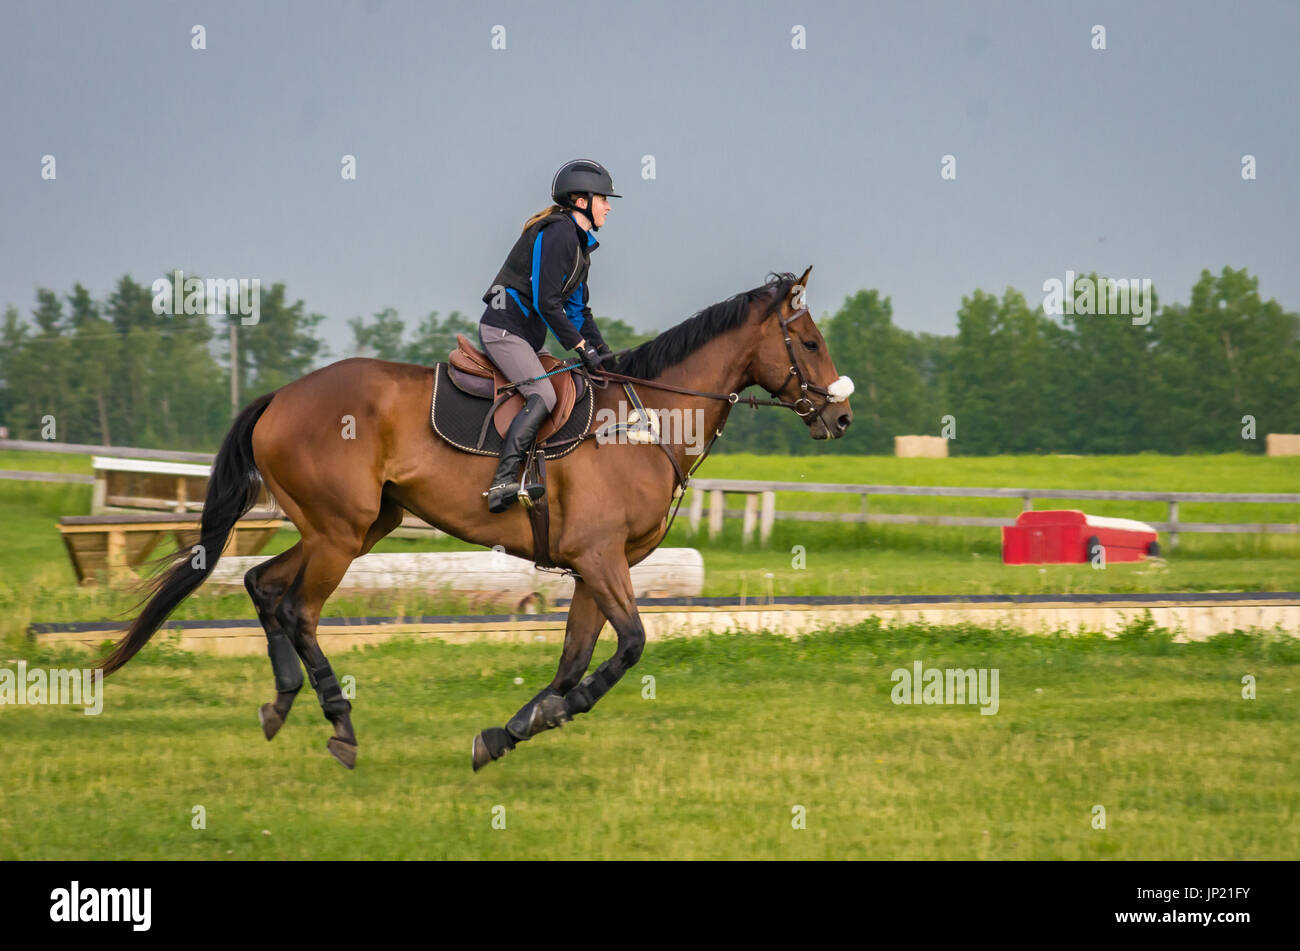 Young female equestrian rider galloping across a green field on a tall gelding horse at an equine training facility near Red Deer, Alberta, Canada Stock Photo